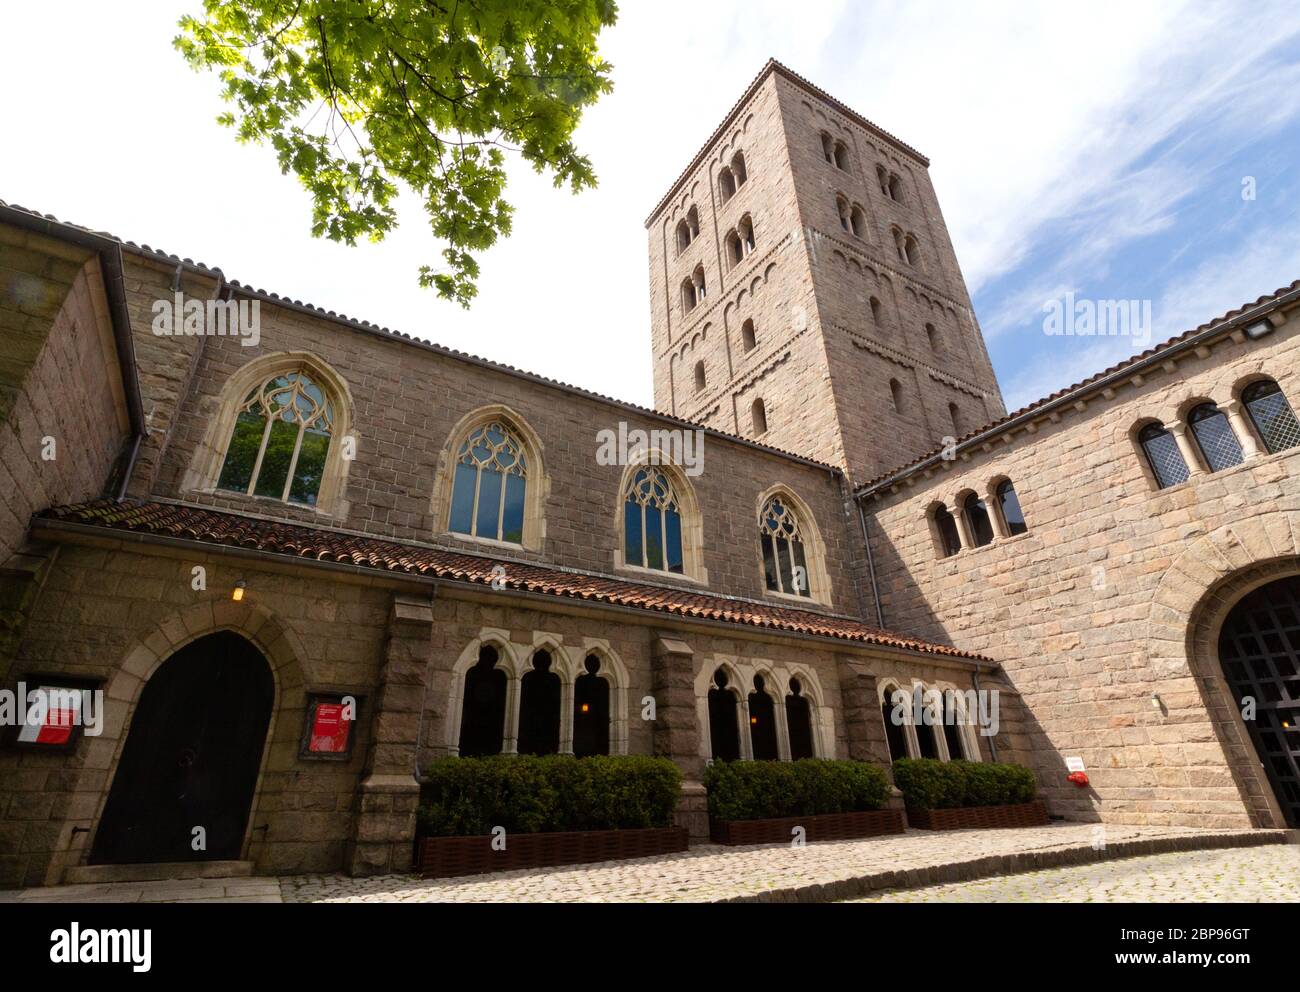 entrance courtyard of the Cloisters Museum in Northern Manhattan, specializing in European medieval architecture, sculpture, and decorative arts Stock Photo